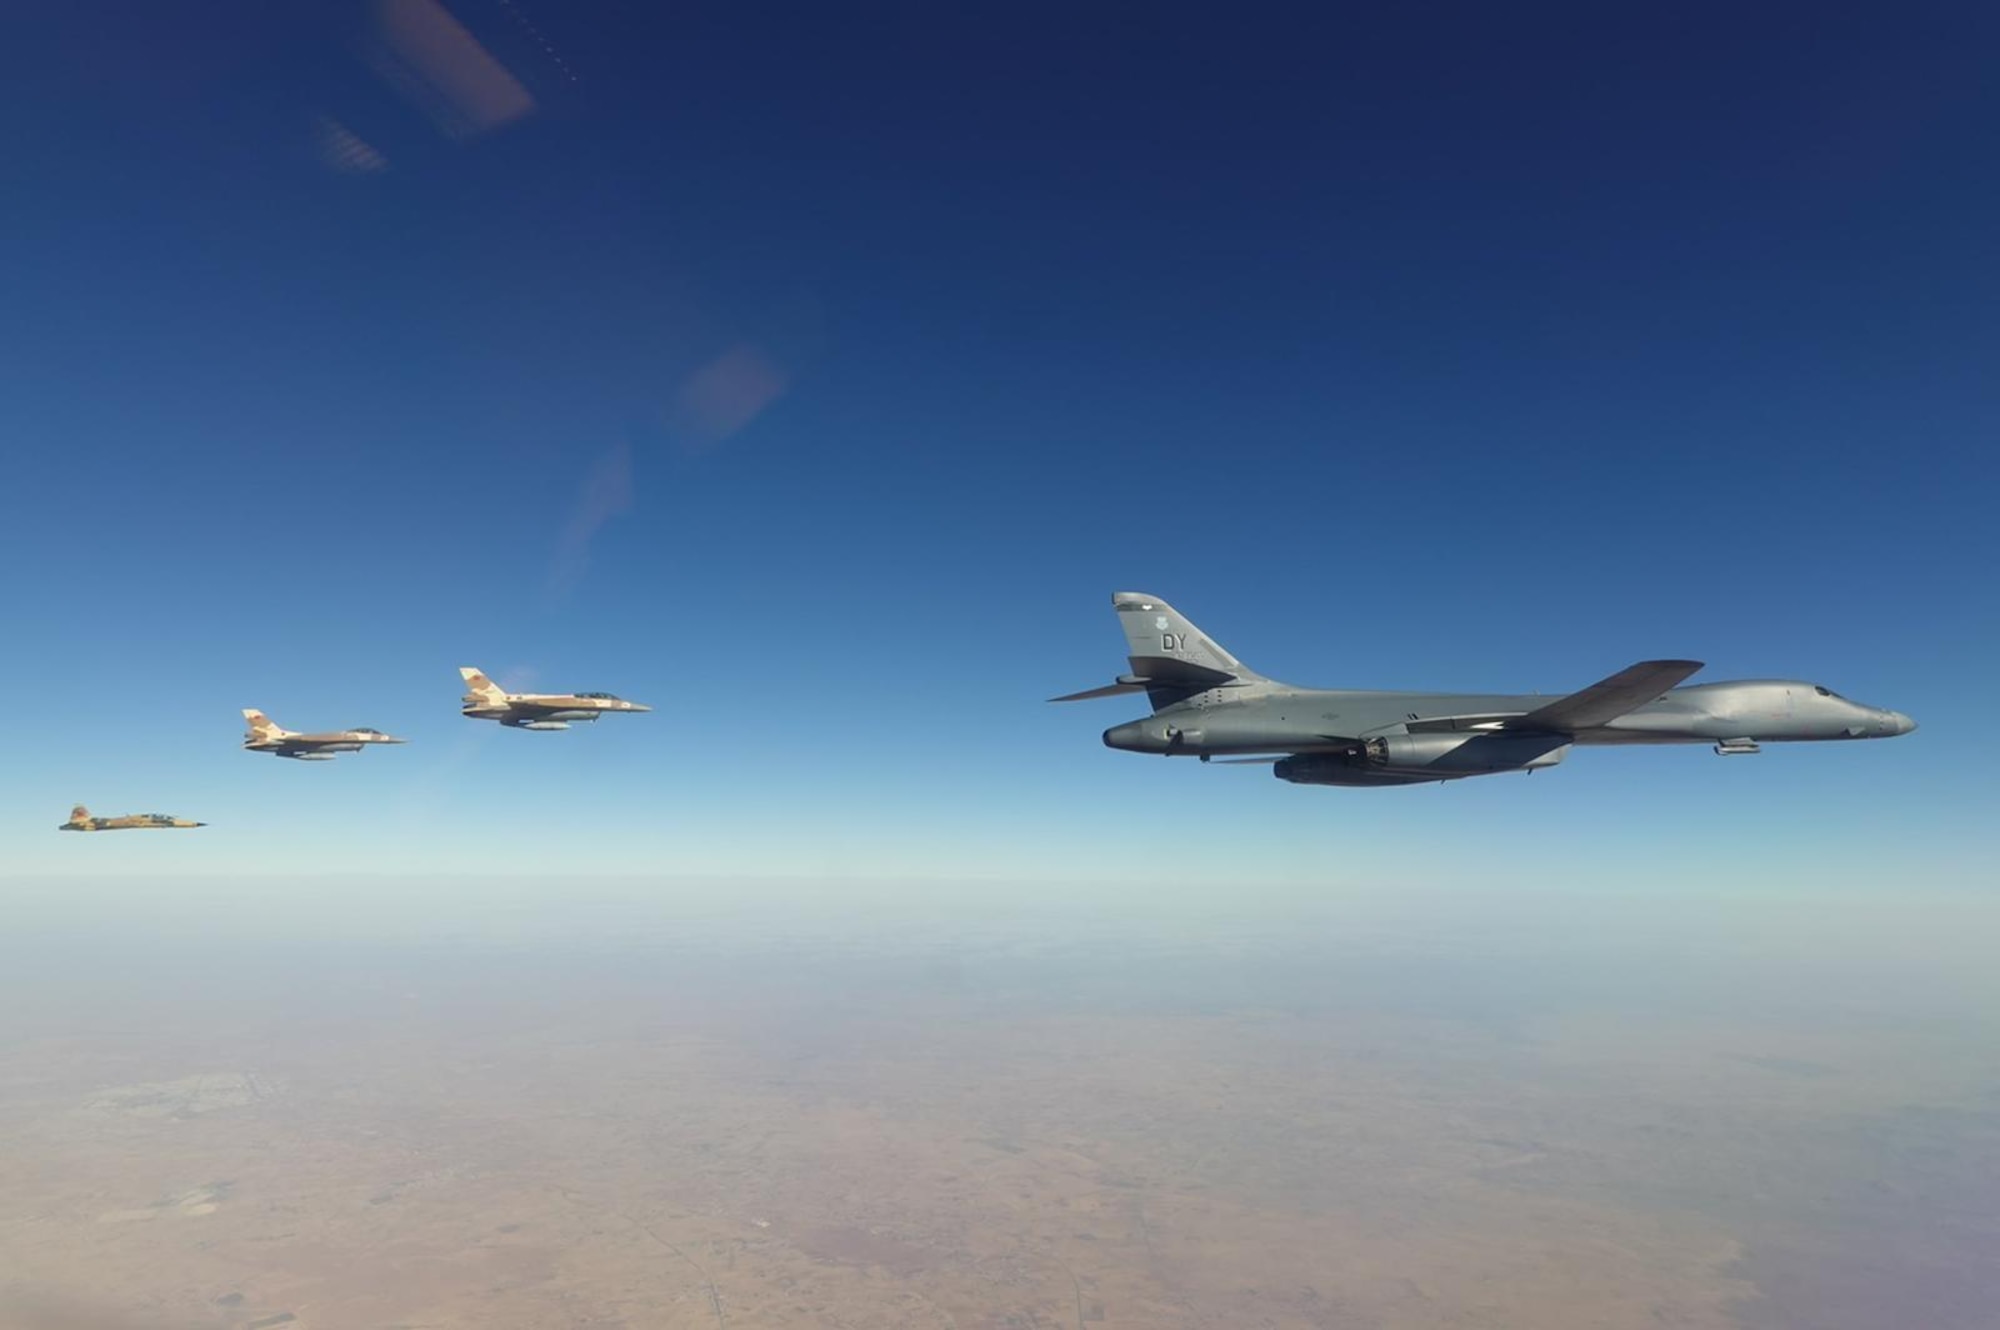 B-1B Lancer bombers from Dyess Air Force Base, Texas, fly with Royal Moroccan Air Force F-16 and F-5 aircraft off the coast of Morocco, June 30, 2022, in support of African Lion 2022. African Lion 2022 (AL22) is U.S. Africa Command's largest, premier, joint, annual exercise hosted by Morocco, Ghana, Senegal and Tunisia, June 6 - 30. More than 7,500 participants from 28 nations and NATO train together with a focus on enhancing readiness for U.S. and partner nation forces. AL22 is a joint all-domain, multi component, and multinational exercise, employing a full array of mission capabilities with the goal to strengthen interoperability among participants and set the theater for strategic access.

(U.S. Air Force Courtesy Photo)